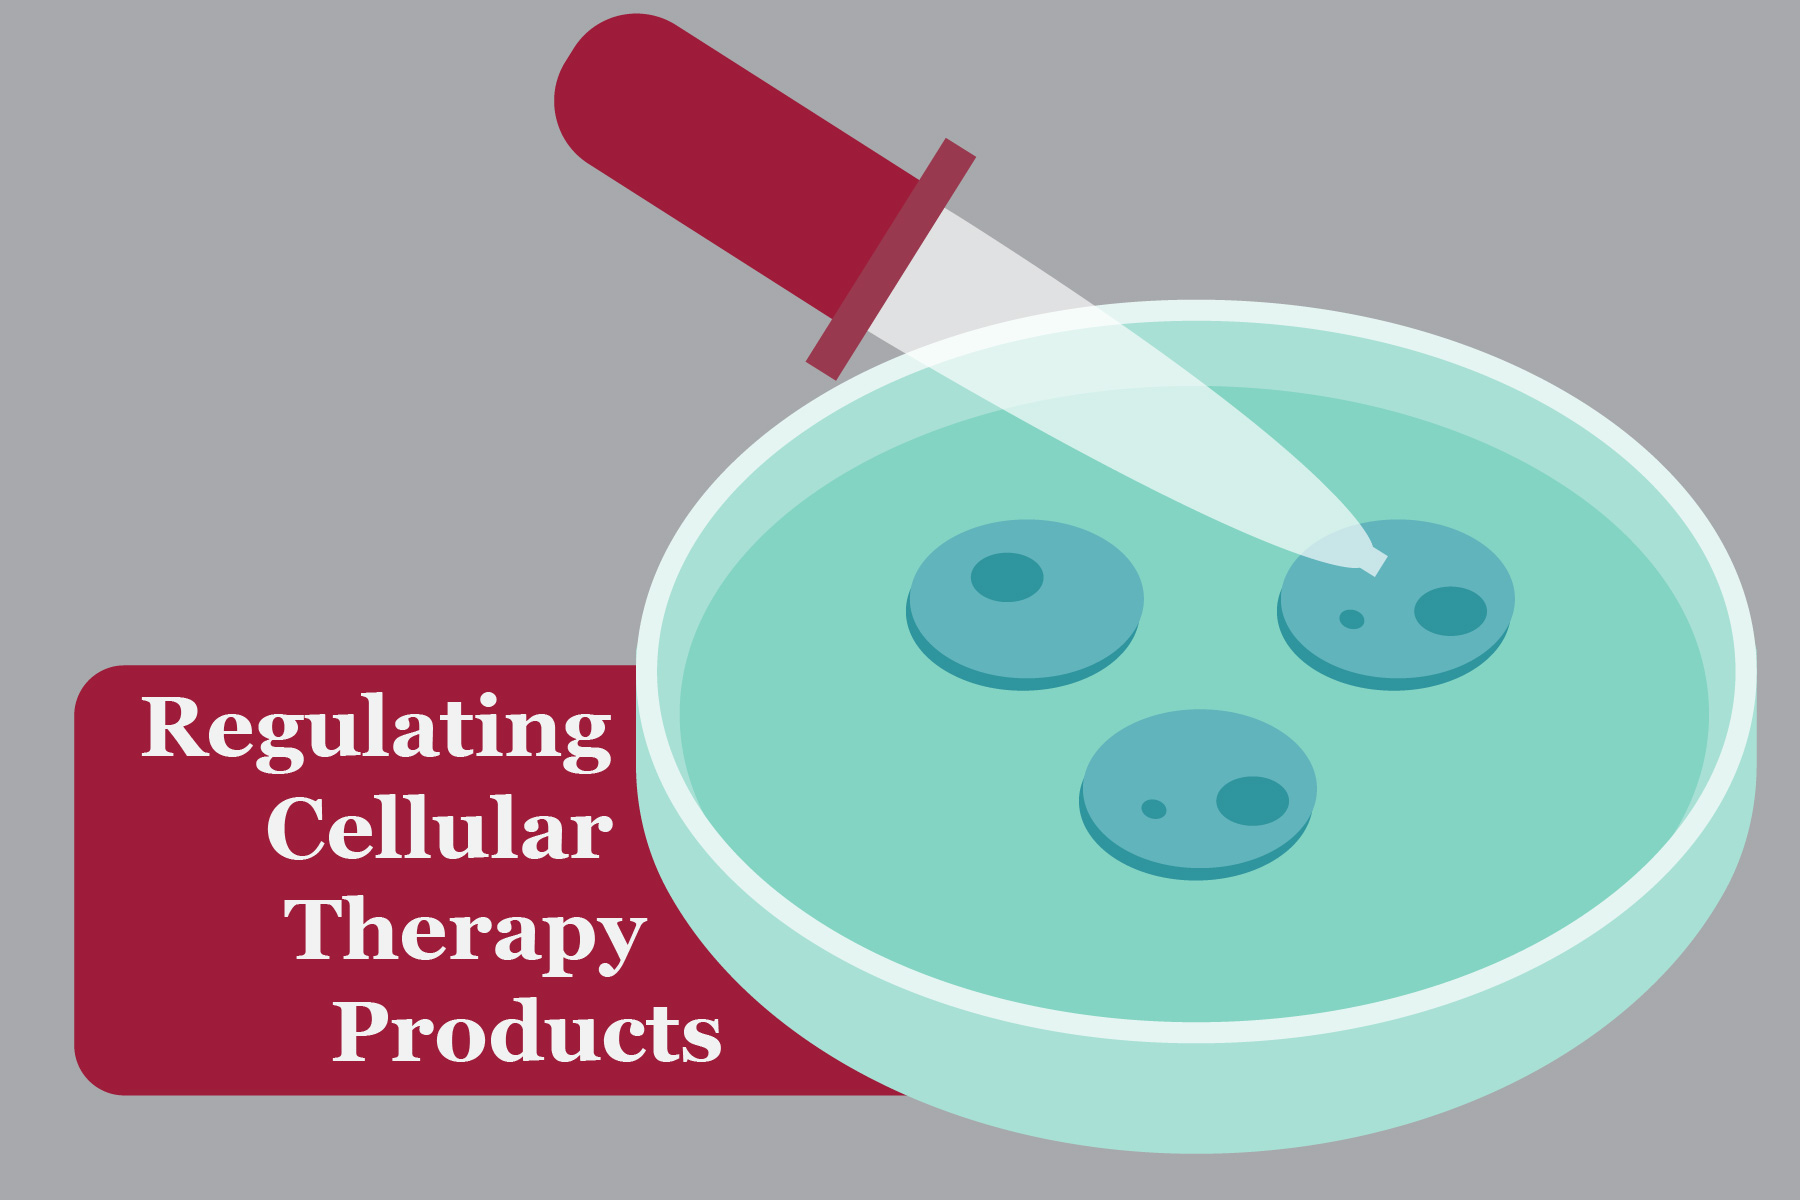 Cellular therapy regulations in the FDA